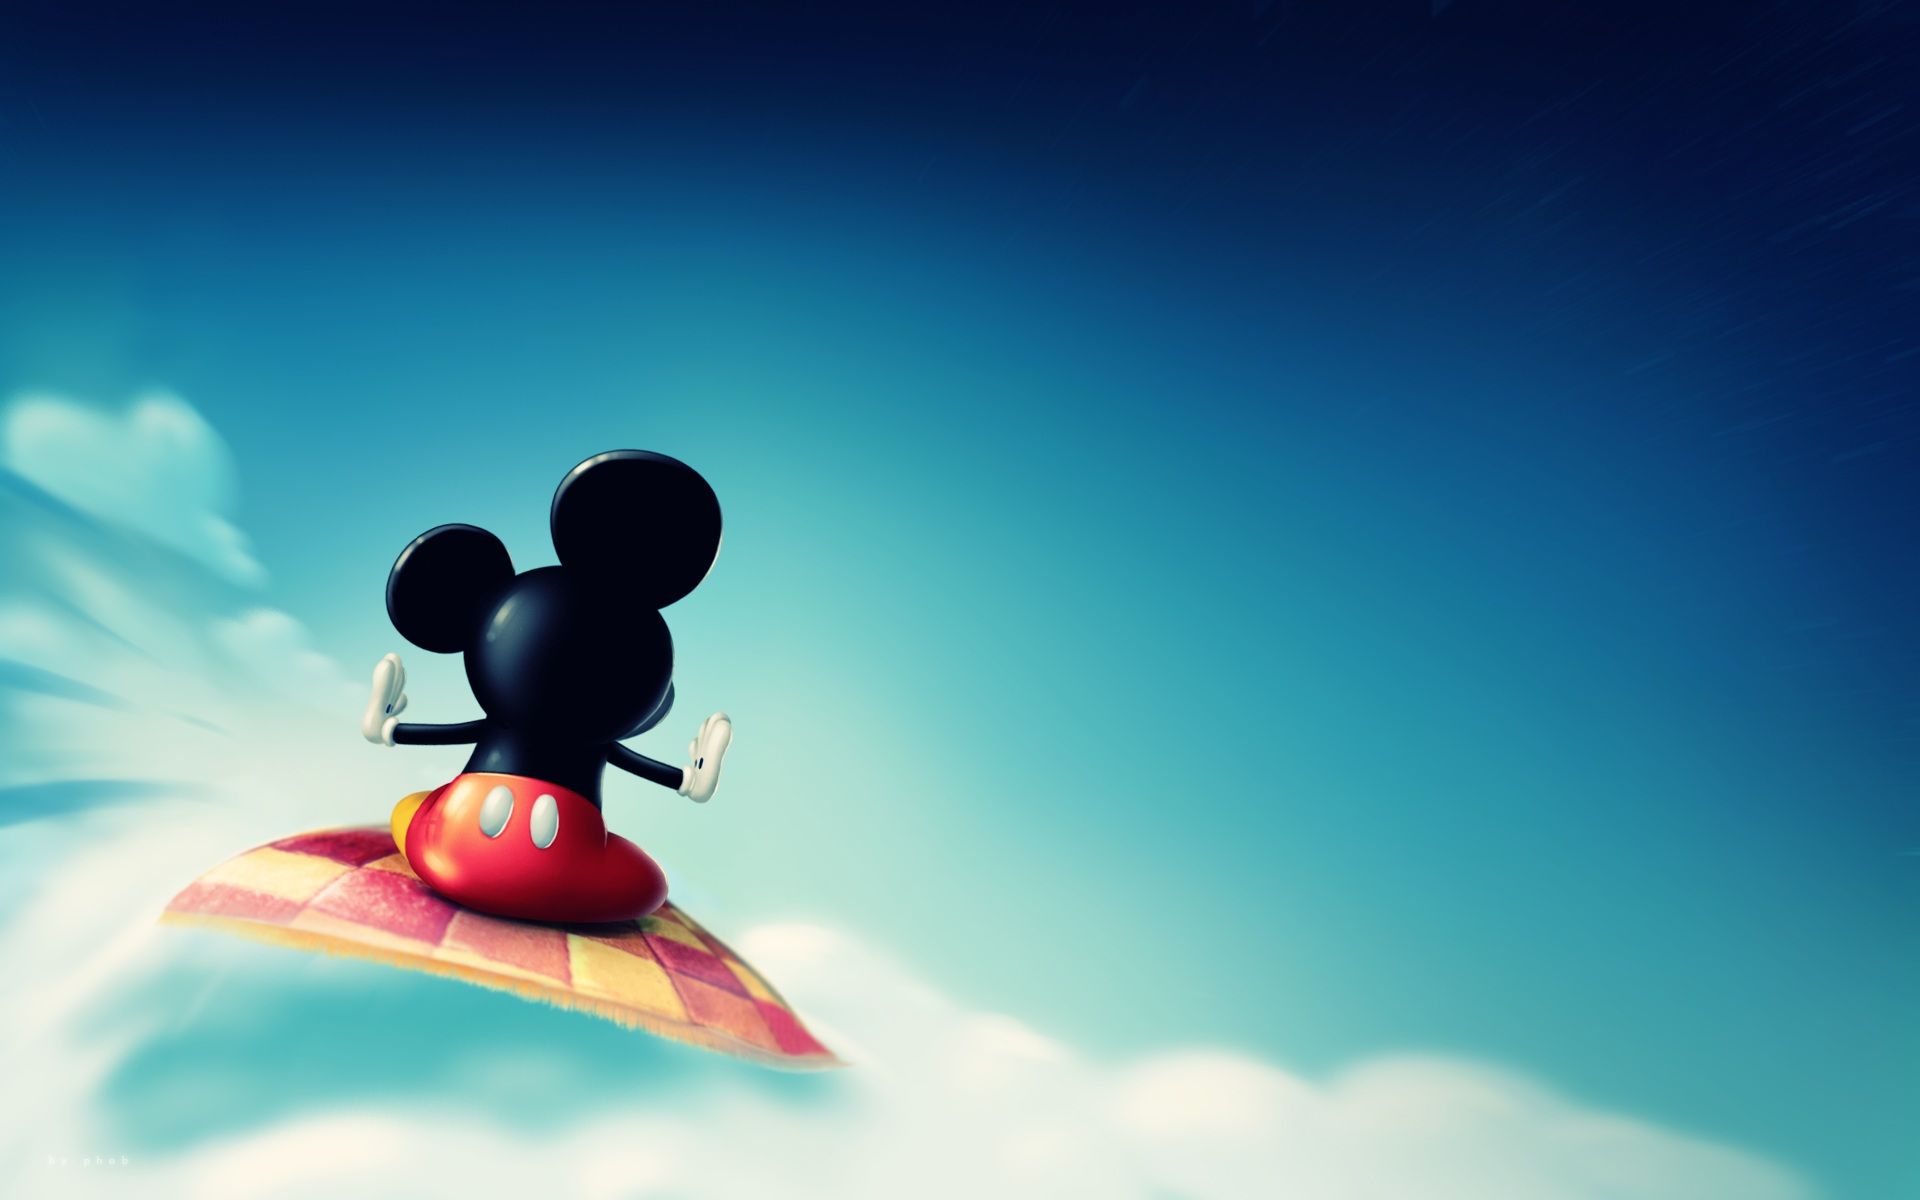 A cartoon character is on top of the water - Mickey Mouse